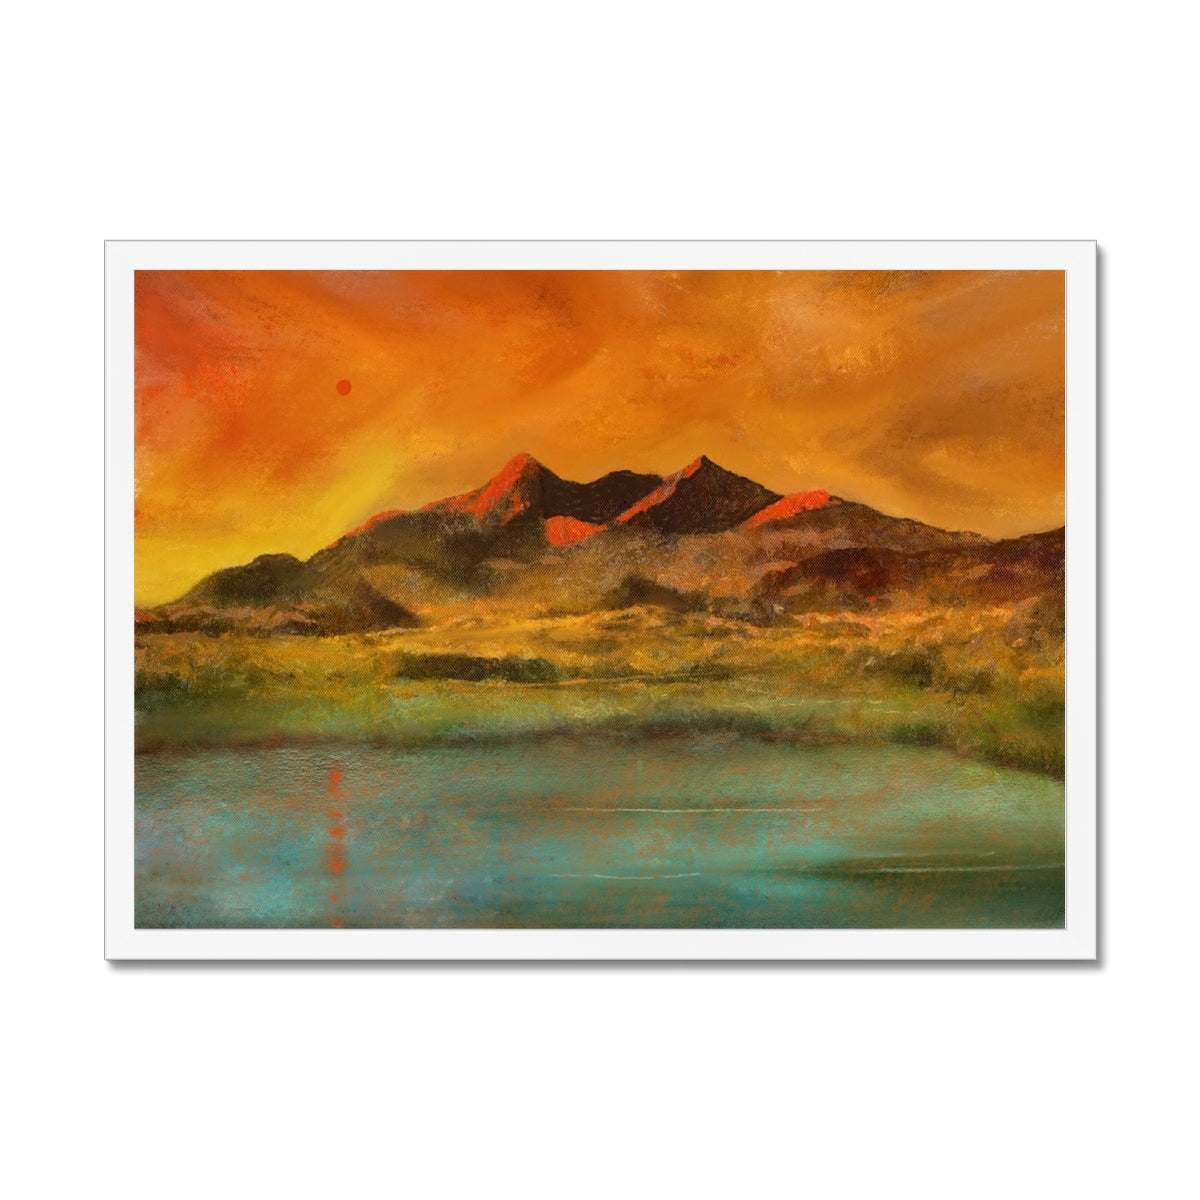 Skye Red Moon Cuillin Painting | Framed Prints From Scotland-Framed Prints-Skye Art Gallery-A2 Landscape-White Frame-Paintings, Prints, Homeware, Art Gifts From Scotland By Scottish Artist Kevin Hunter